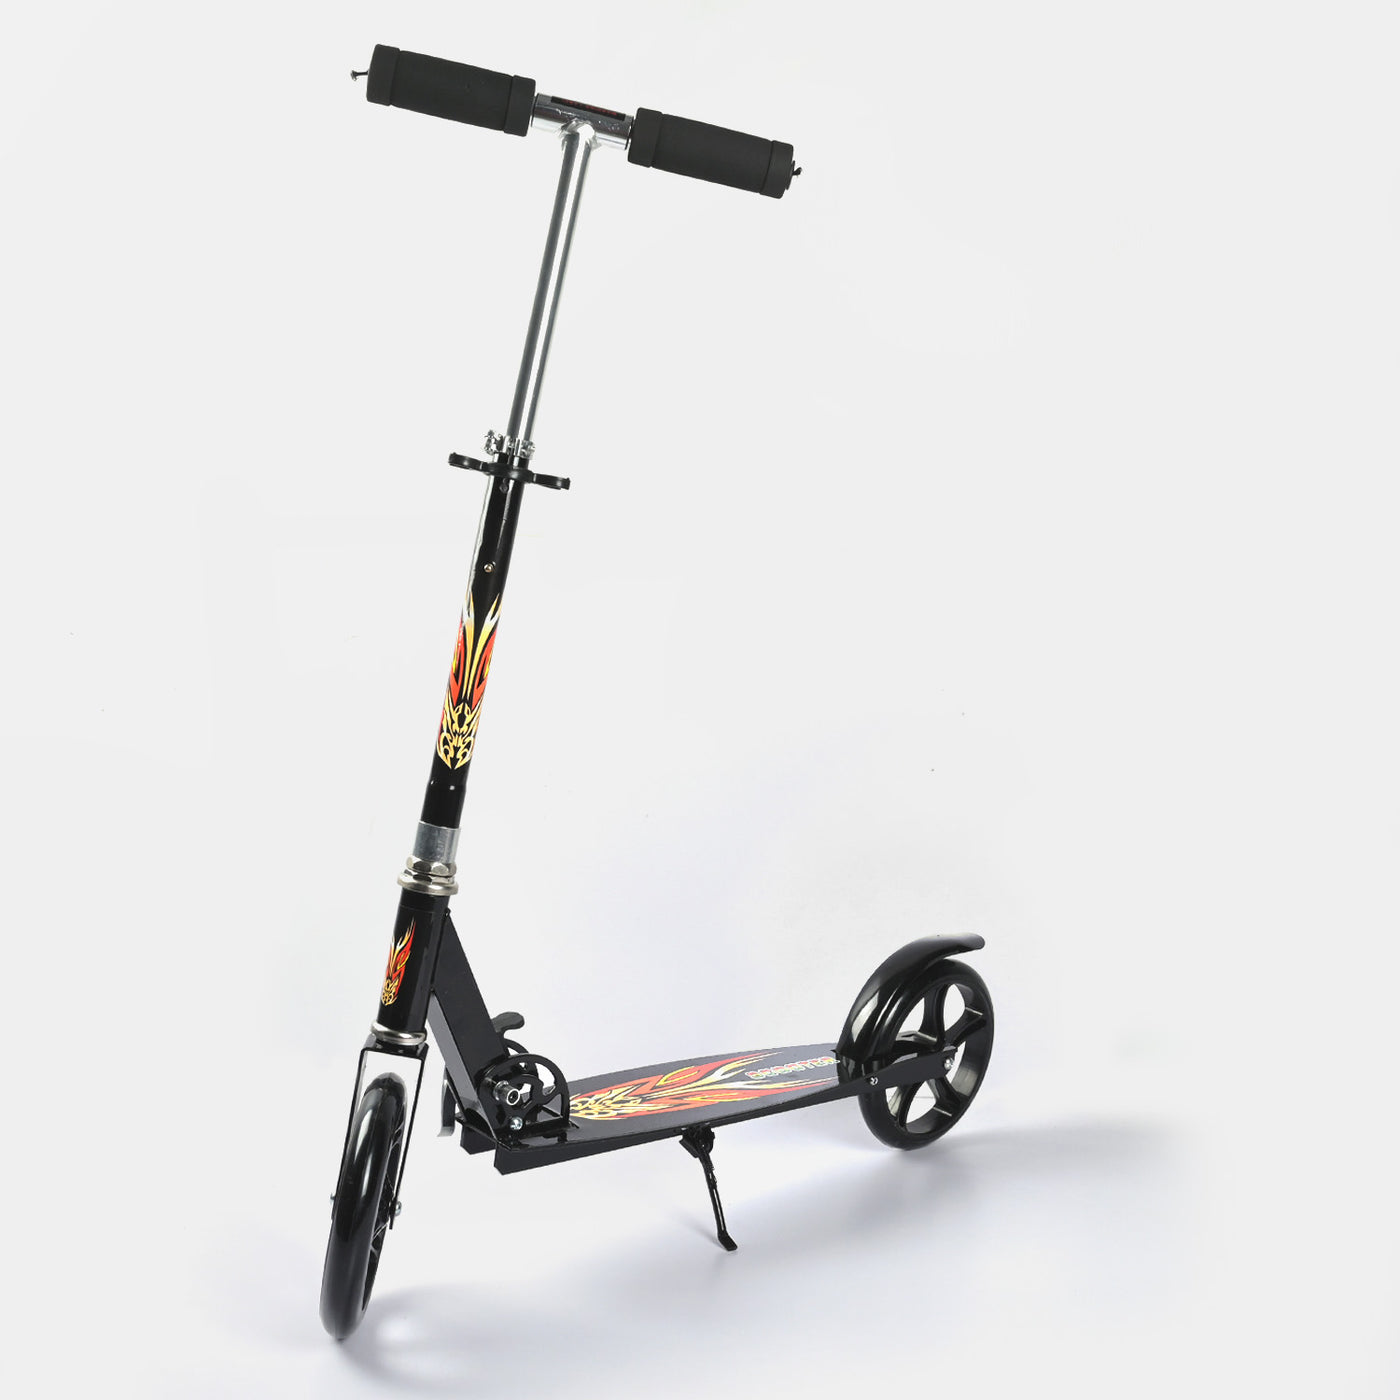 Adjustable Height Folding T-Scooter For Kids